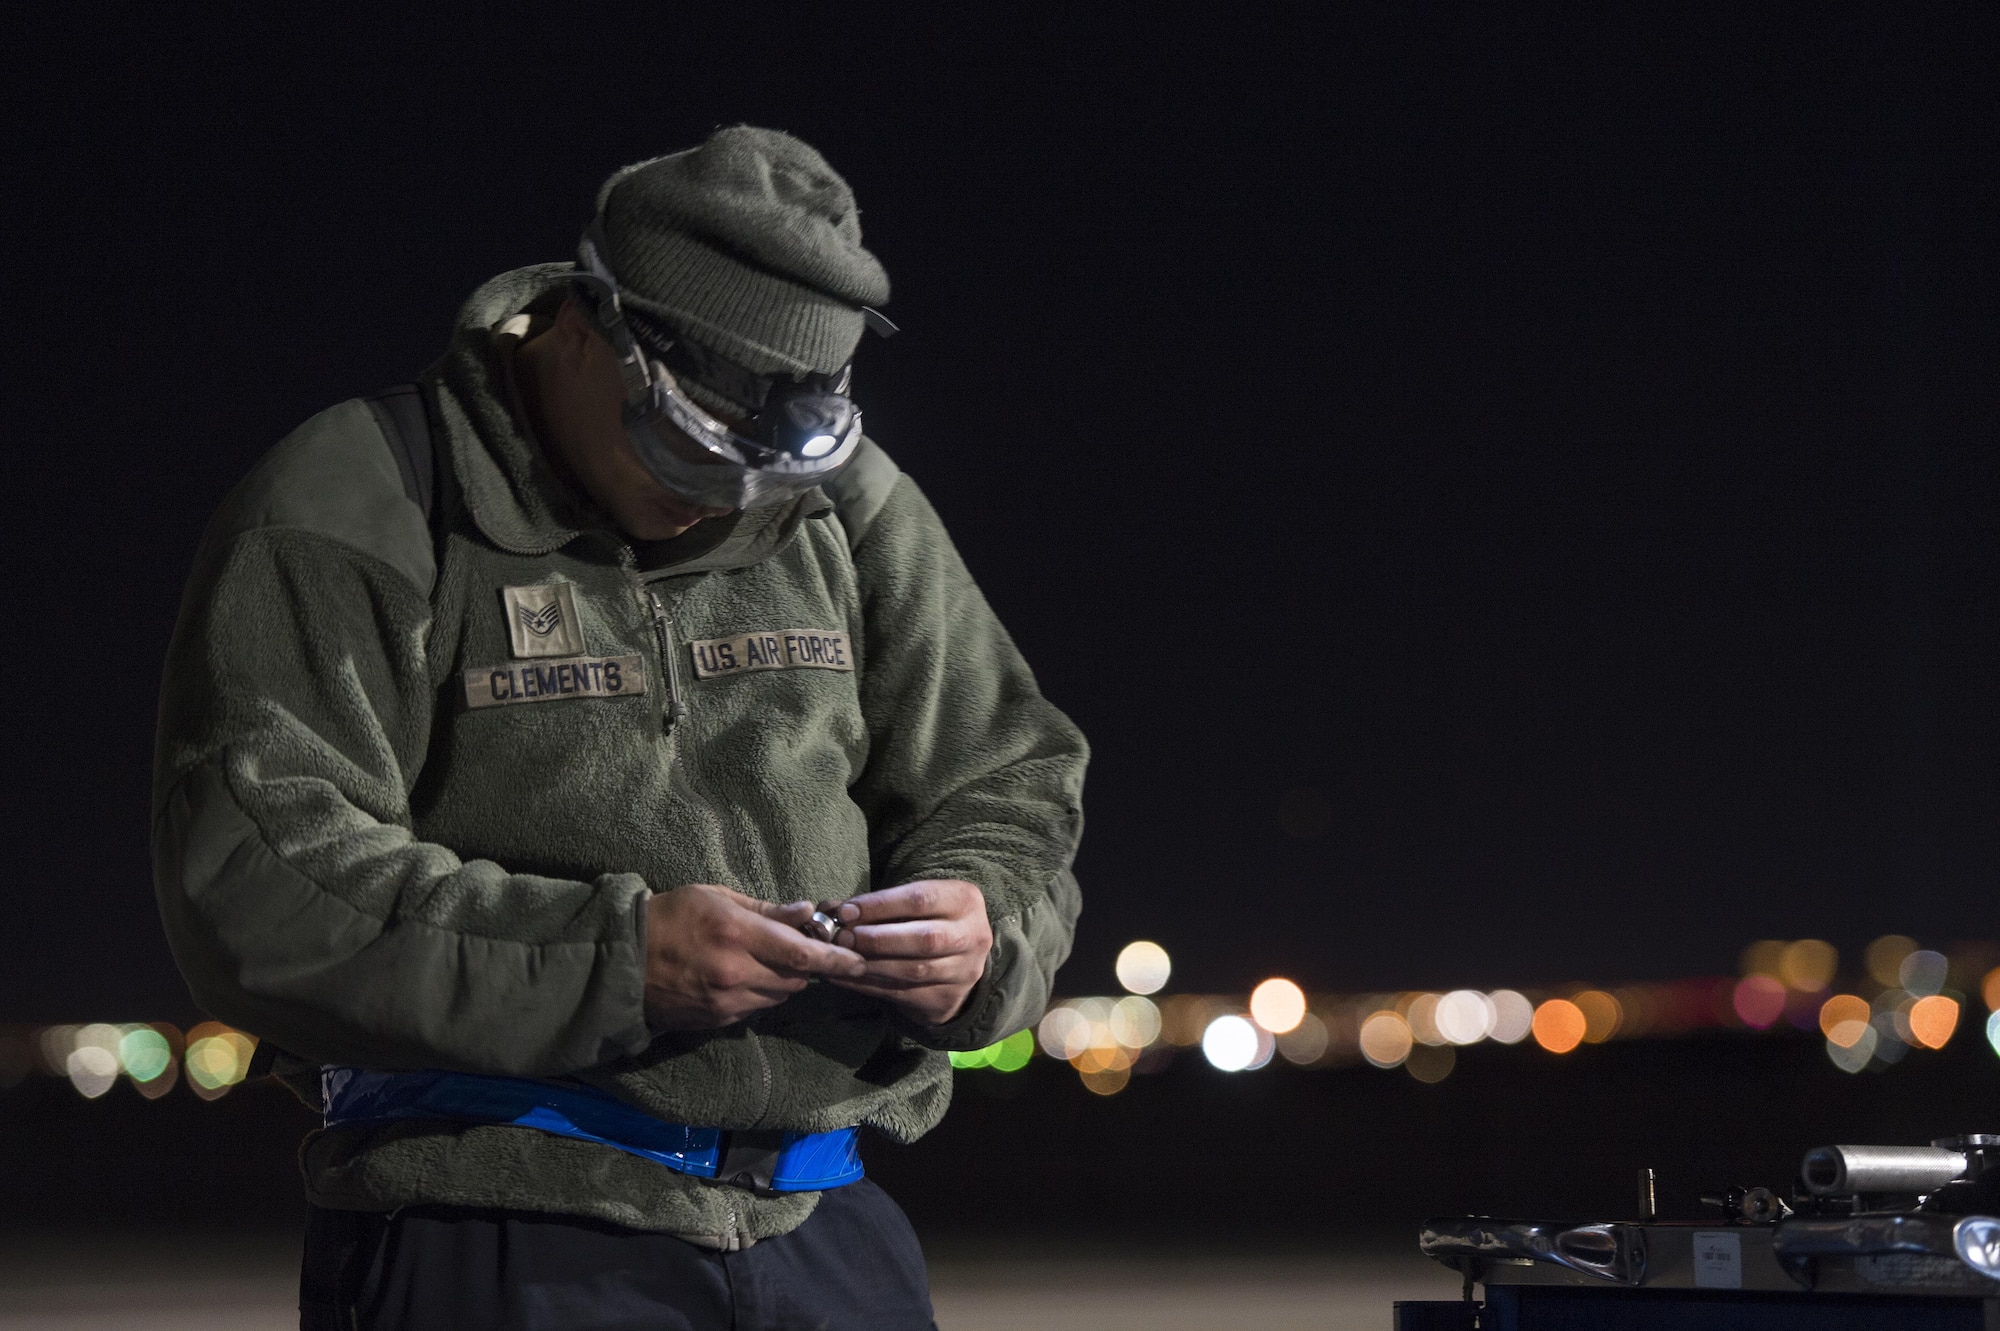 U.S. Air Force Staff Sgt. Samuel Clements, 20th Aircraft Maintenance Squadron avionics specialist, Shaw Air Force Base, S.C. uses light from a headlamp to select an appropriate tool while conducting repairs on an F-16CM Fighting Falcon in support of Red Flag 17-2 at Nellis AFB, Nev., Feb. 28, 2017. Red Flag provides an opportunity for 20th Fighter Wing aircrew and maintainers to enhance their tactical operational skills by exposing them to a simulated combat environment. (U.S. Air Force photo by Senior Airman Zade Vadnais)